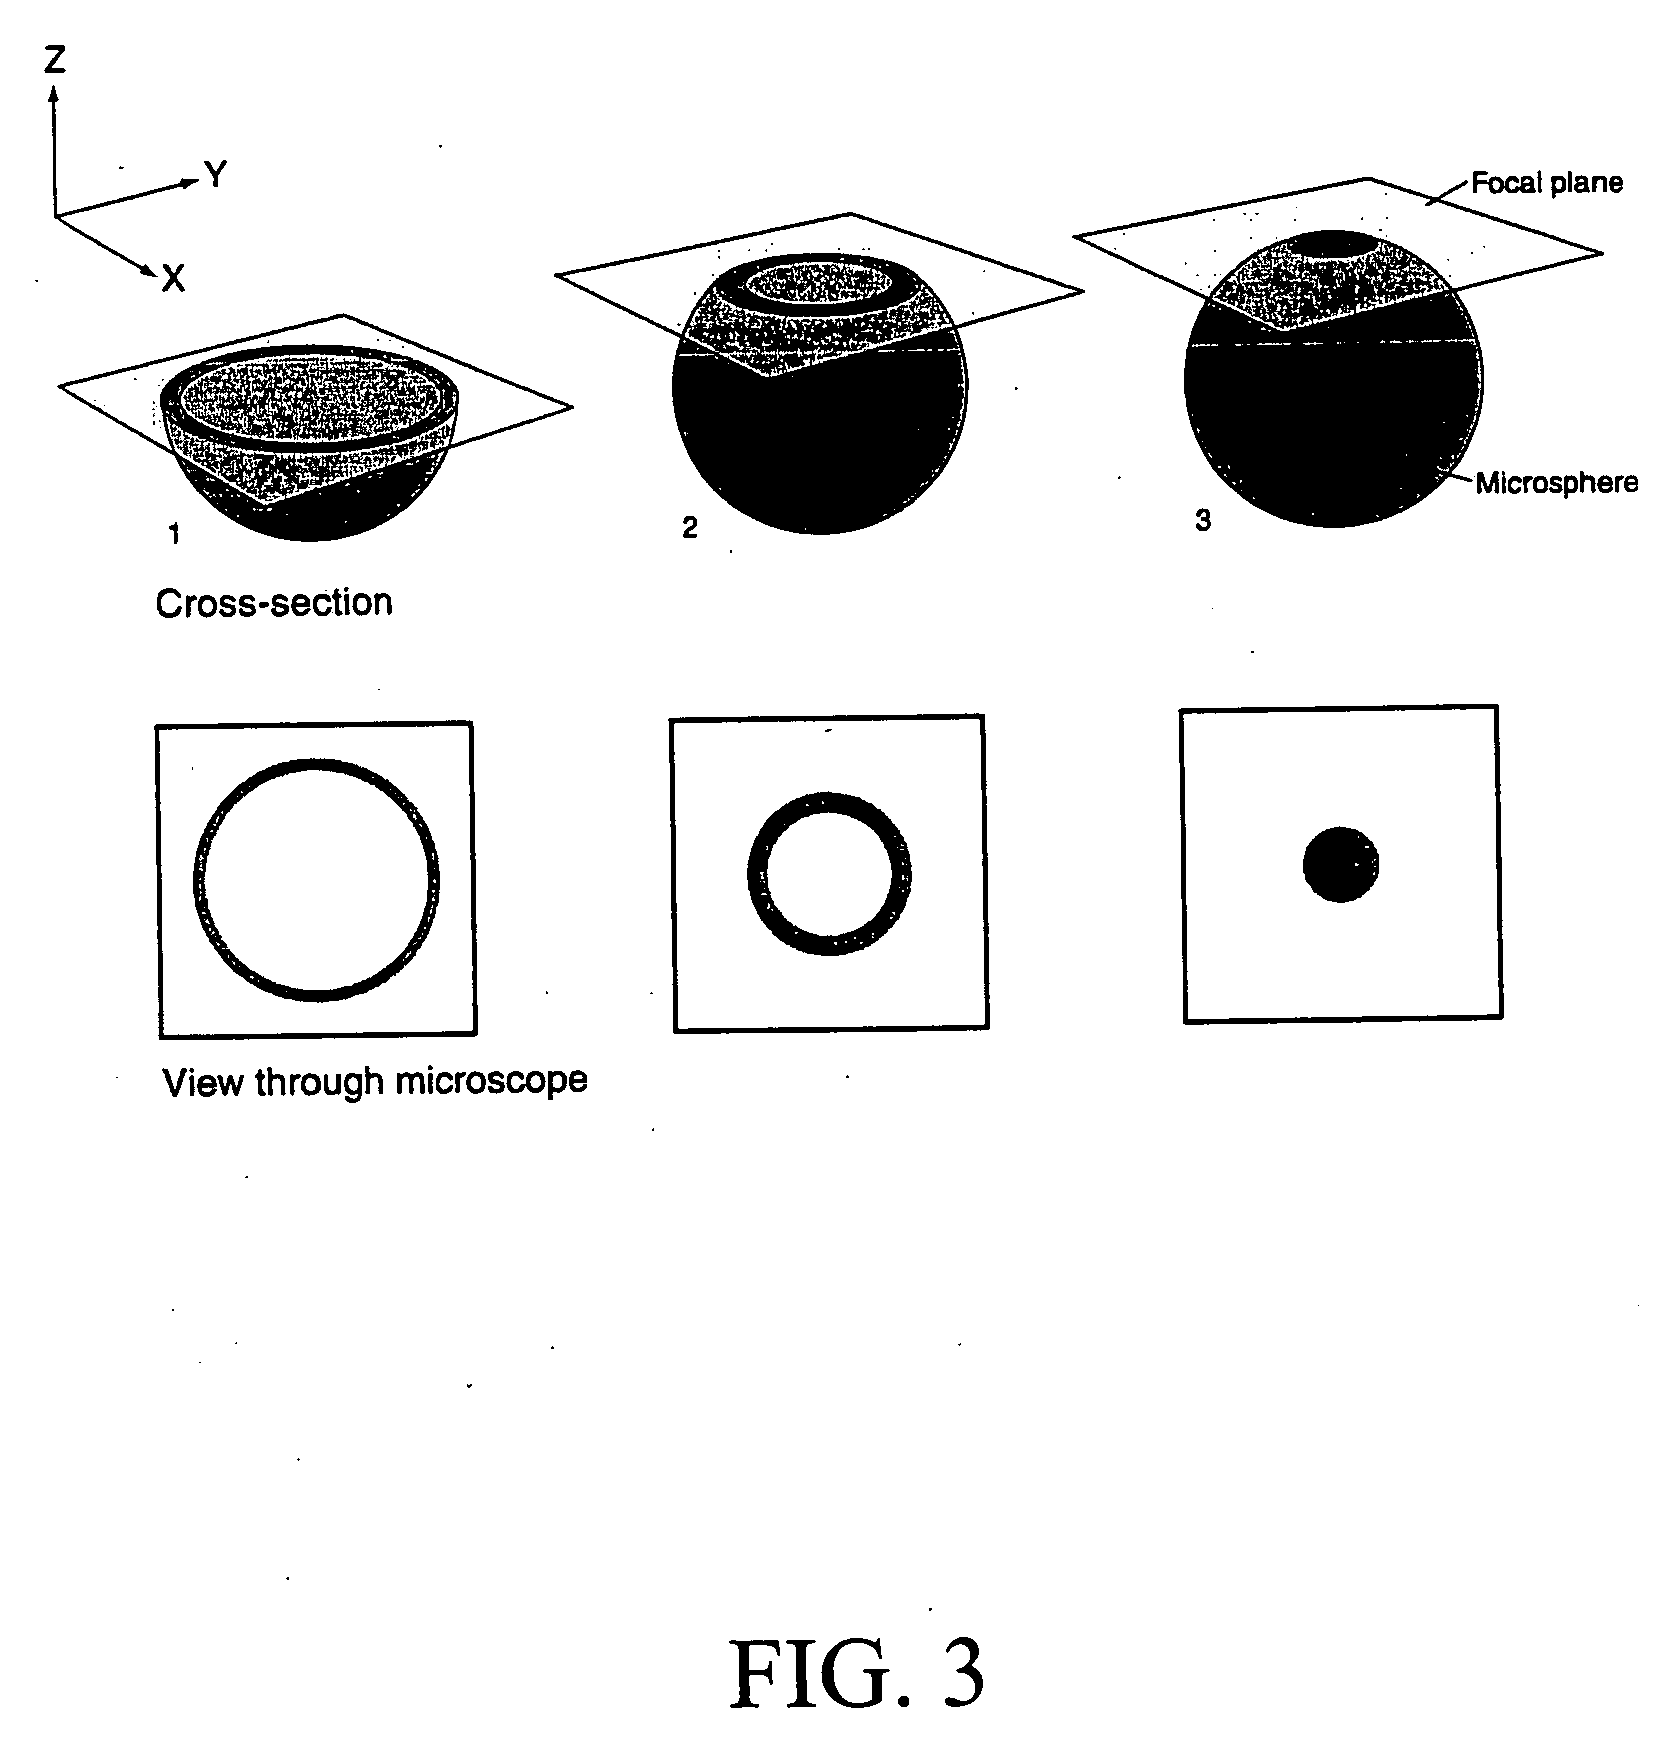 Microplates containing microsphere fluorescence standards, microsphere standards, and methods for their use